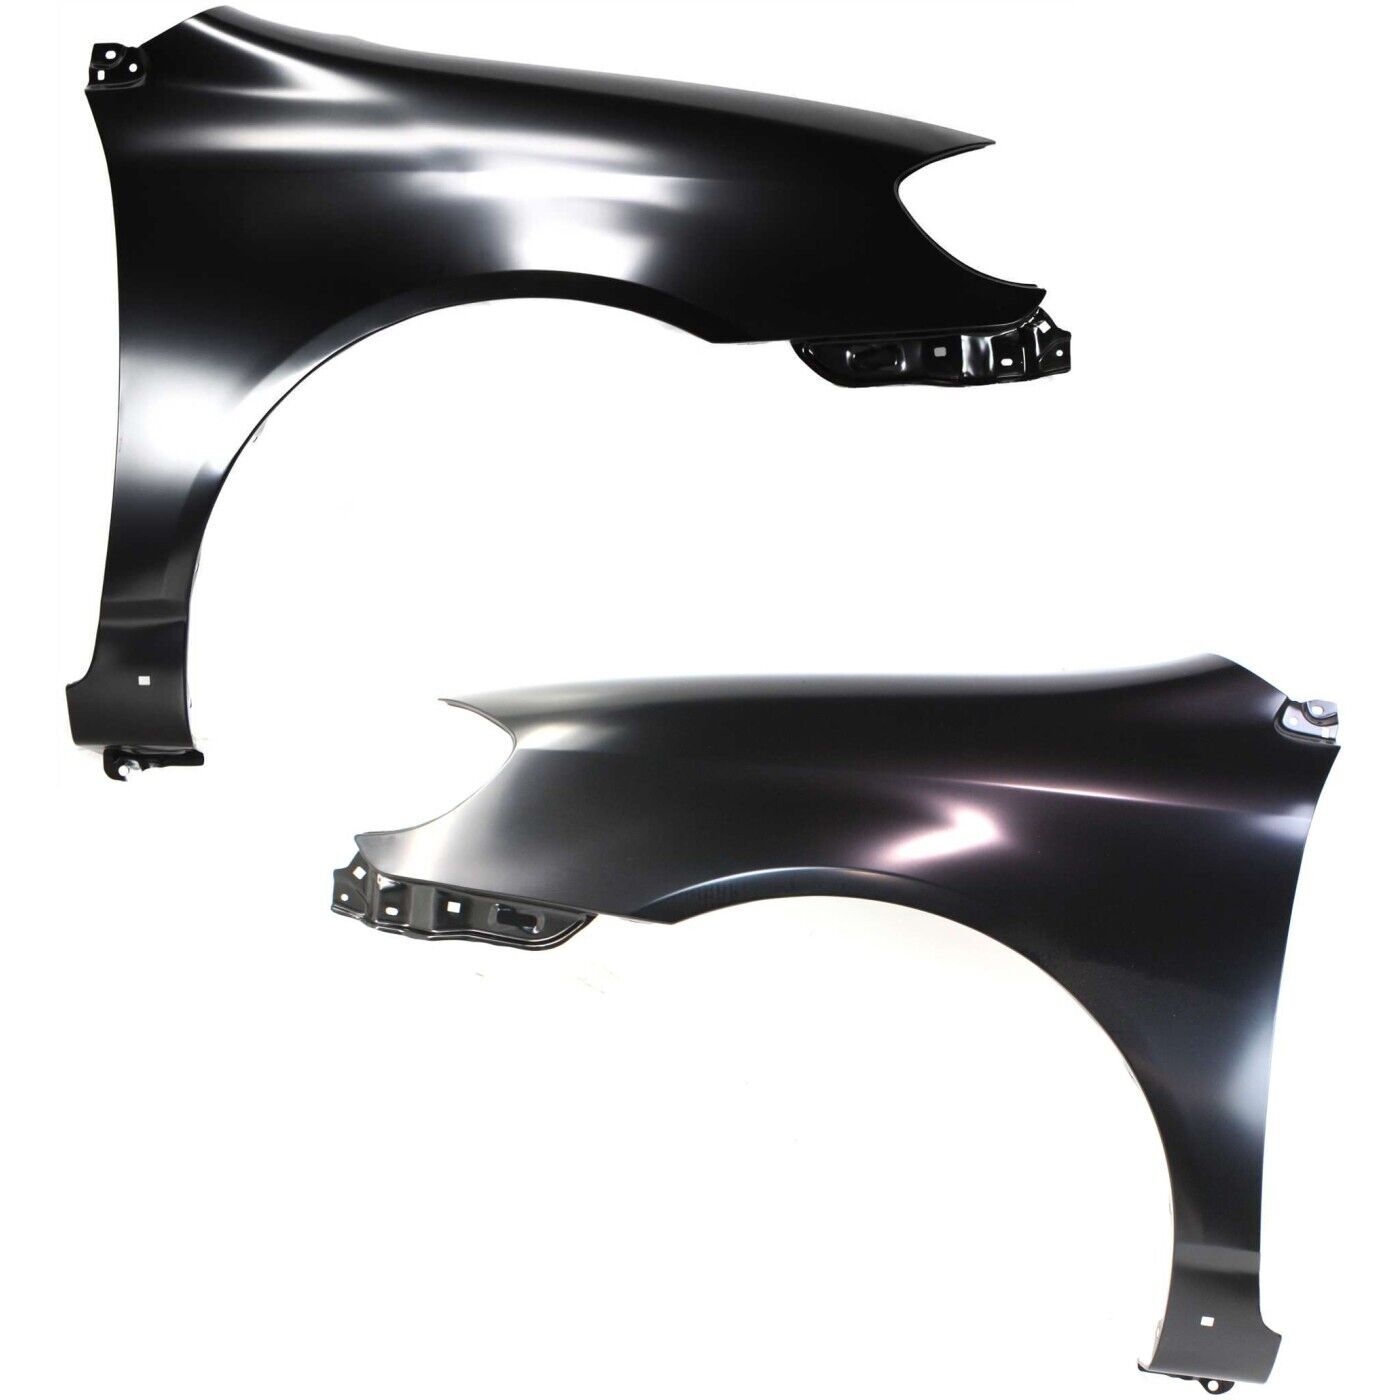 Fender Set For 2003-08 Toyota Corolla XRS/S Models Front RH and LH Primed Steel